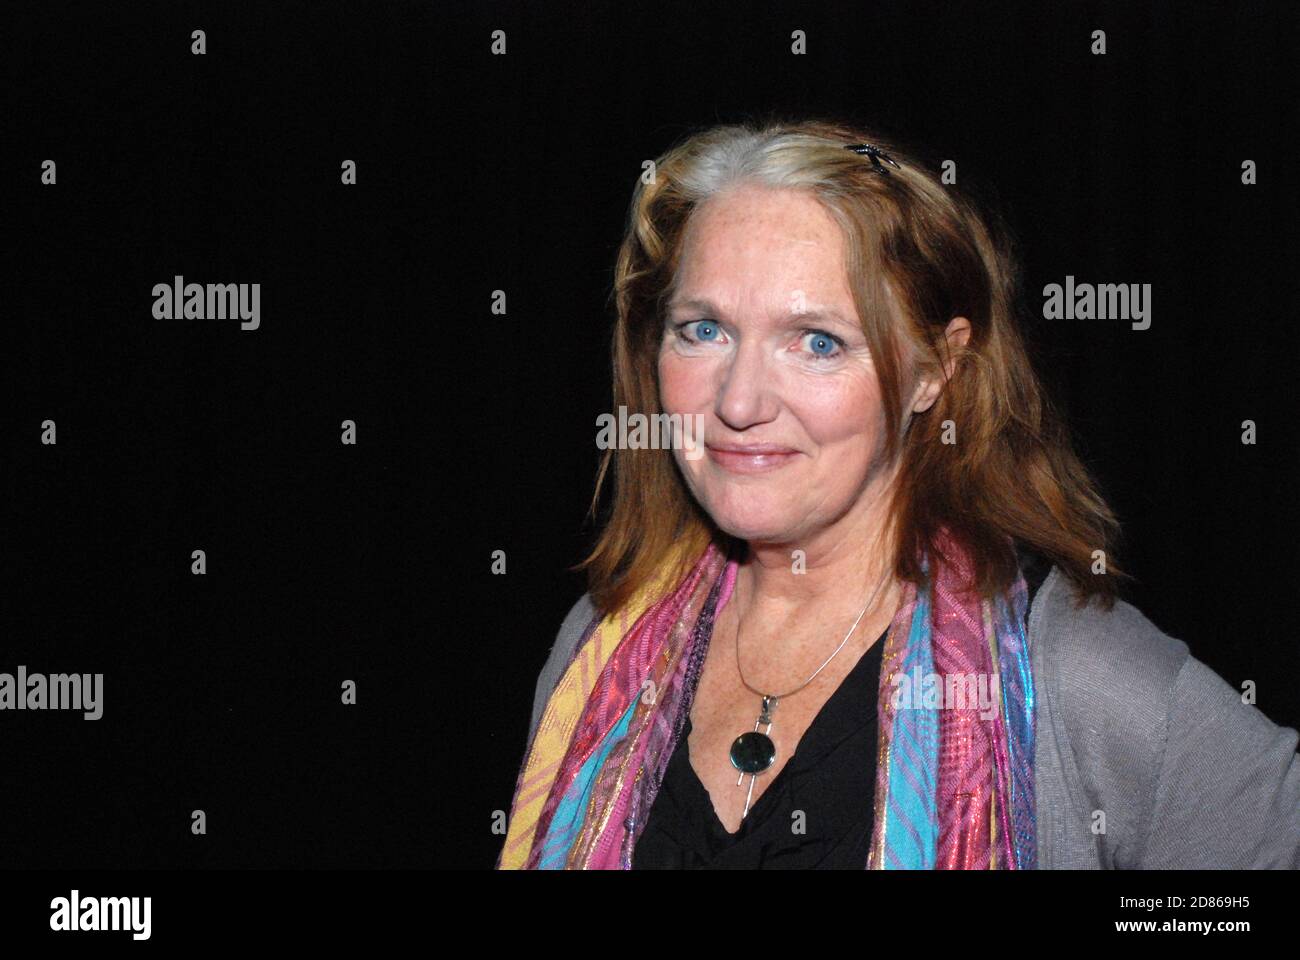 Louise Jameson, English TV, Film, Theatre Actress, Director, Known for Dr Who Doctor Who Tenko, EastEnders, Bergerac. Here Behind Scenes at Face Value Stock Photo